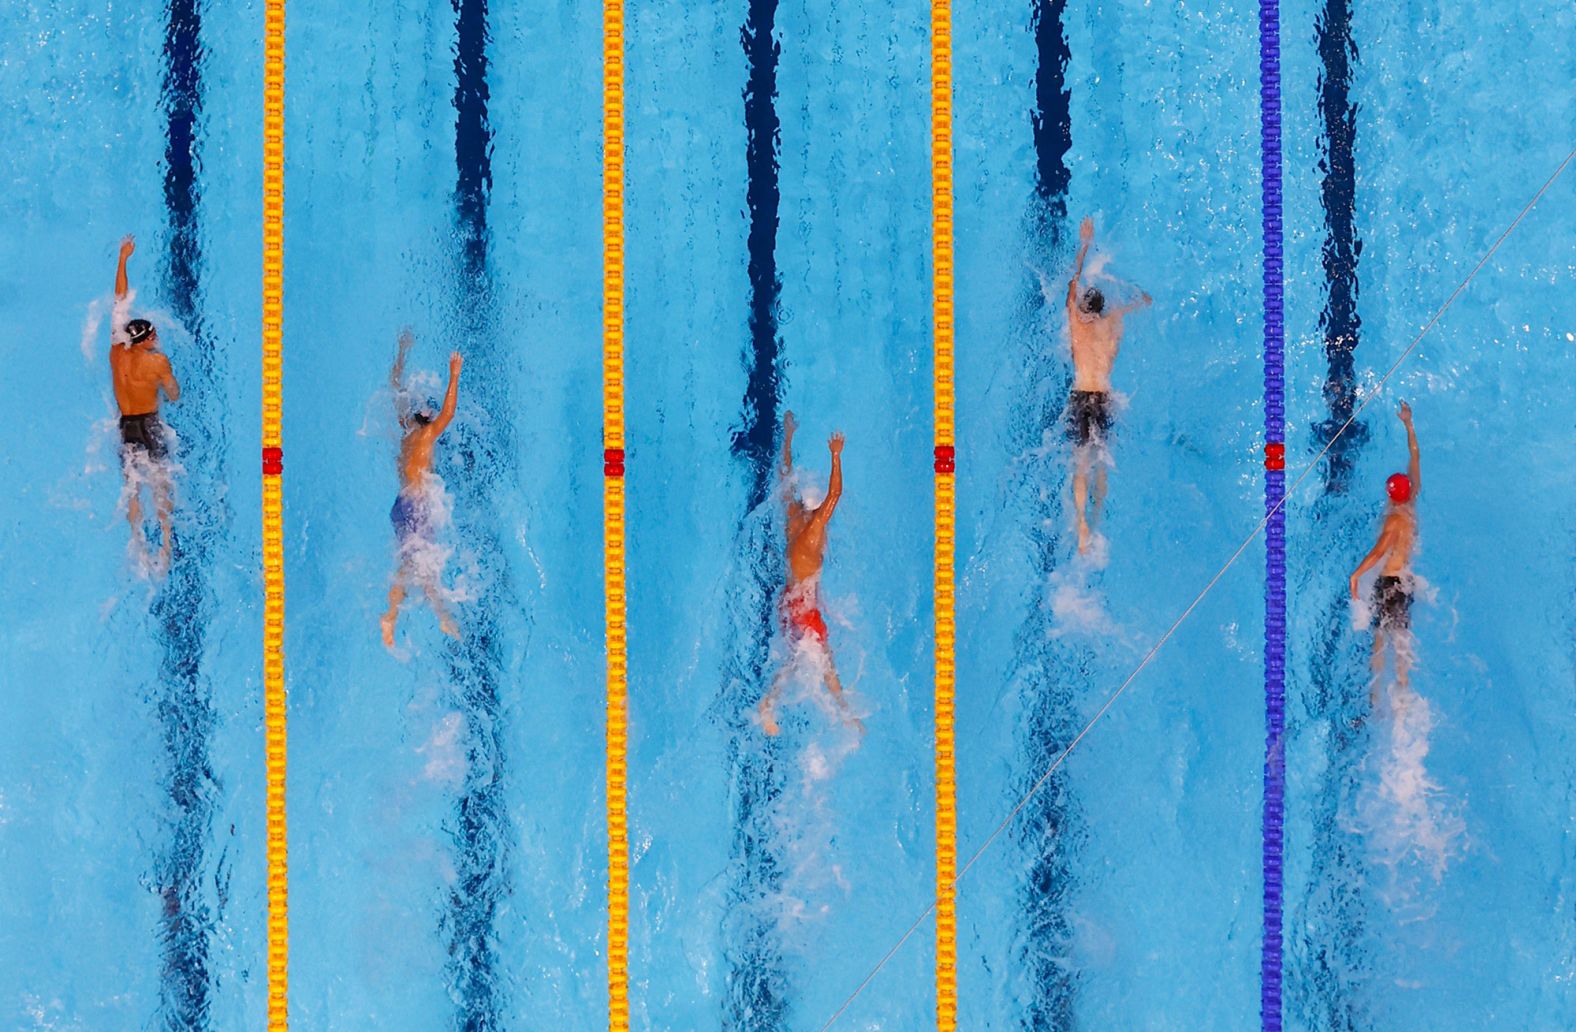 From left, Italy's Gregorio Paltrinieri, the United States' Bobby Finke, Ukraine's Mykhailo Romanchuk, Germany's Florian Wellbrock and Great Britain's Daniel Jervis race the 1,500-meter freestyle on August 1. <a href="index.php?page=&url=https%3A%2F%2Fwww.cnn.com%2Fworld%2Flive-news%2Ftokyo-2020-olympics-07-31-21-spt%2Fh_fd9cb74d1f4403d6a096f915c2eeb0dd" target="_blank">Finke won the gold</a> after racing down Romanchuk and Wellbrock in the final 50 meters. Finke also won gold in the 800-meter freestyle earlier in these Olympics.